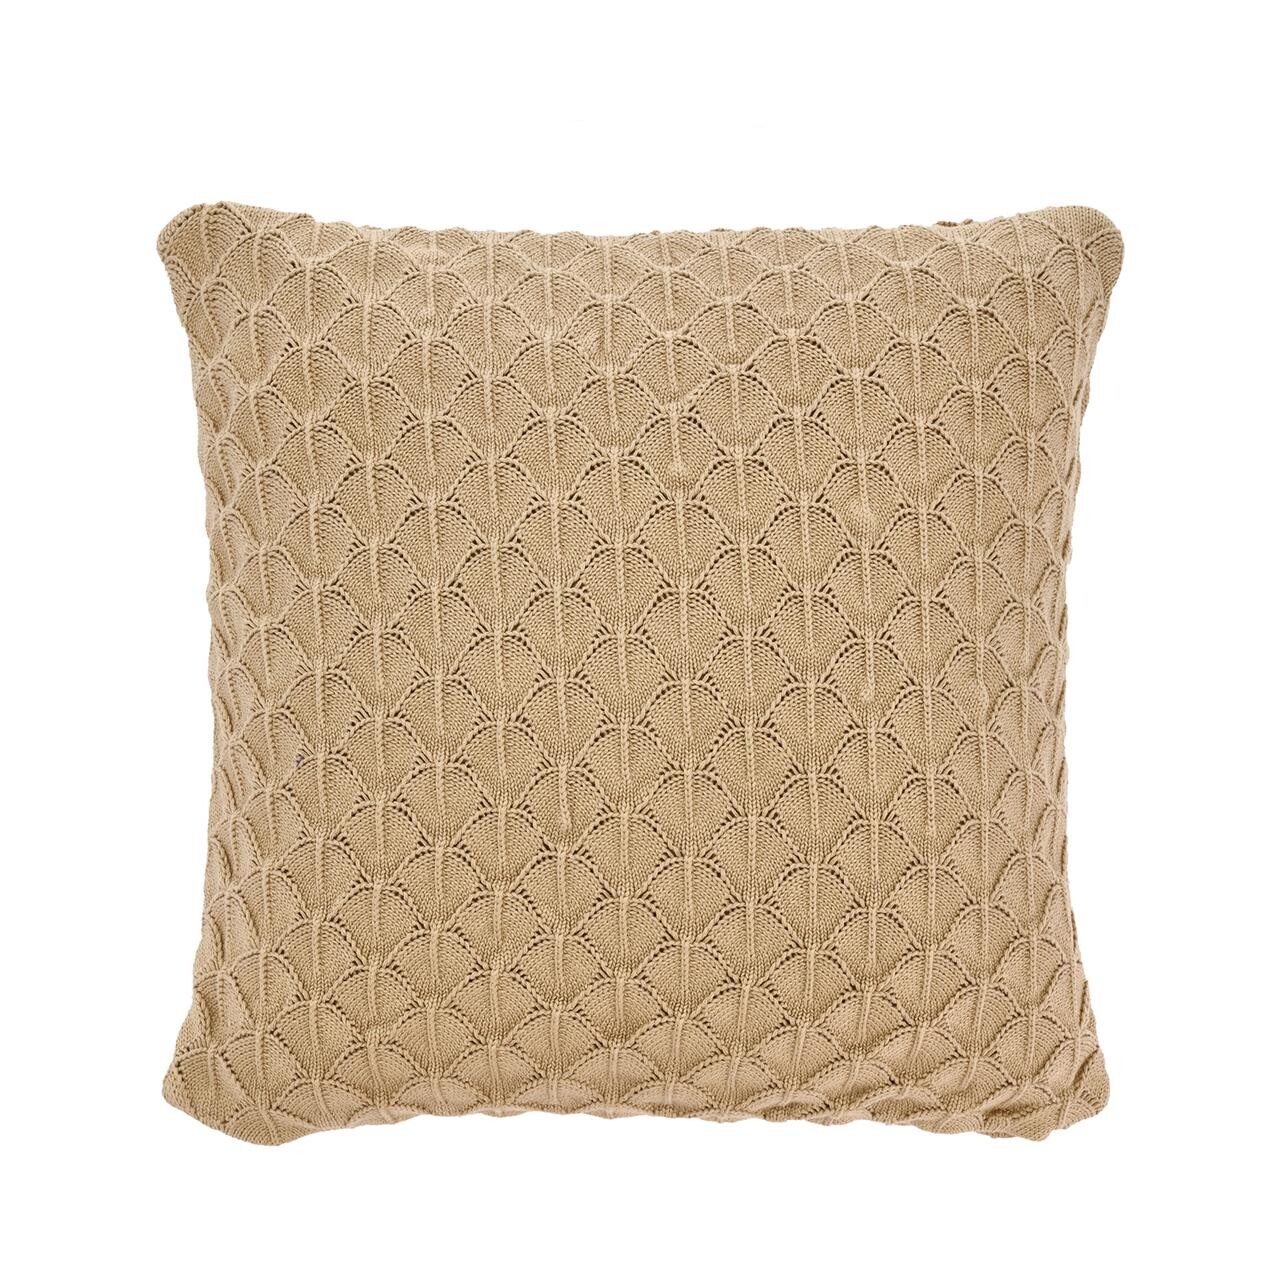 SÖDAHL Scallop pude 45×45 cm taupe